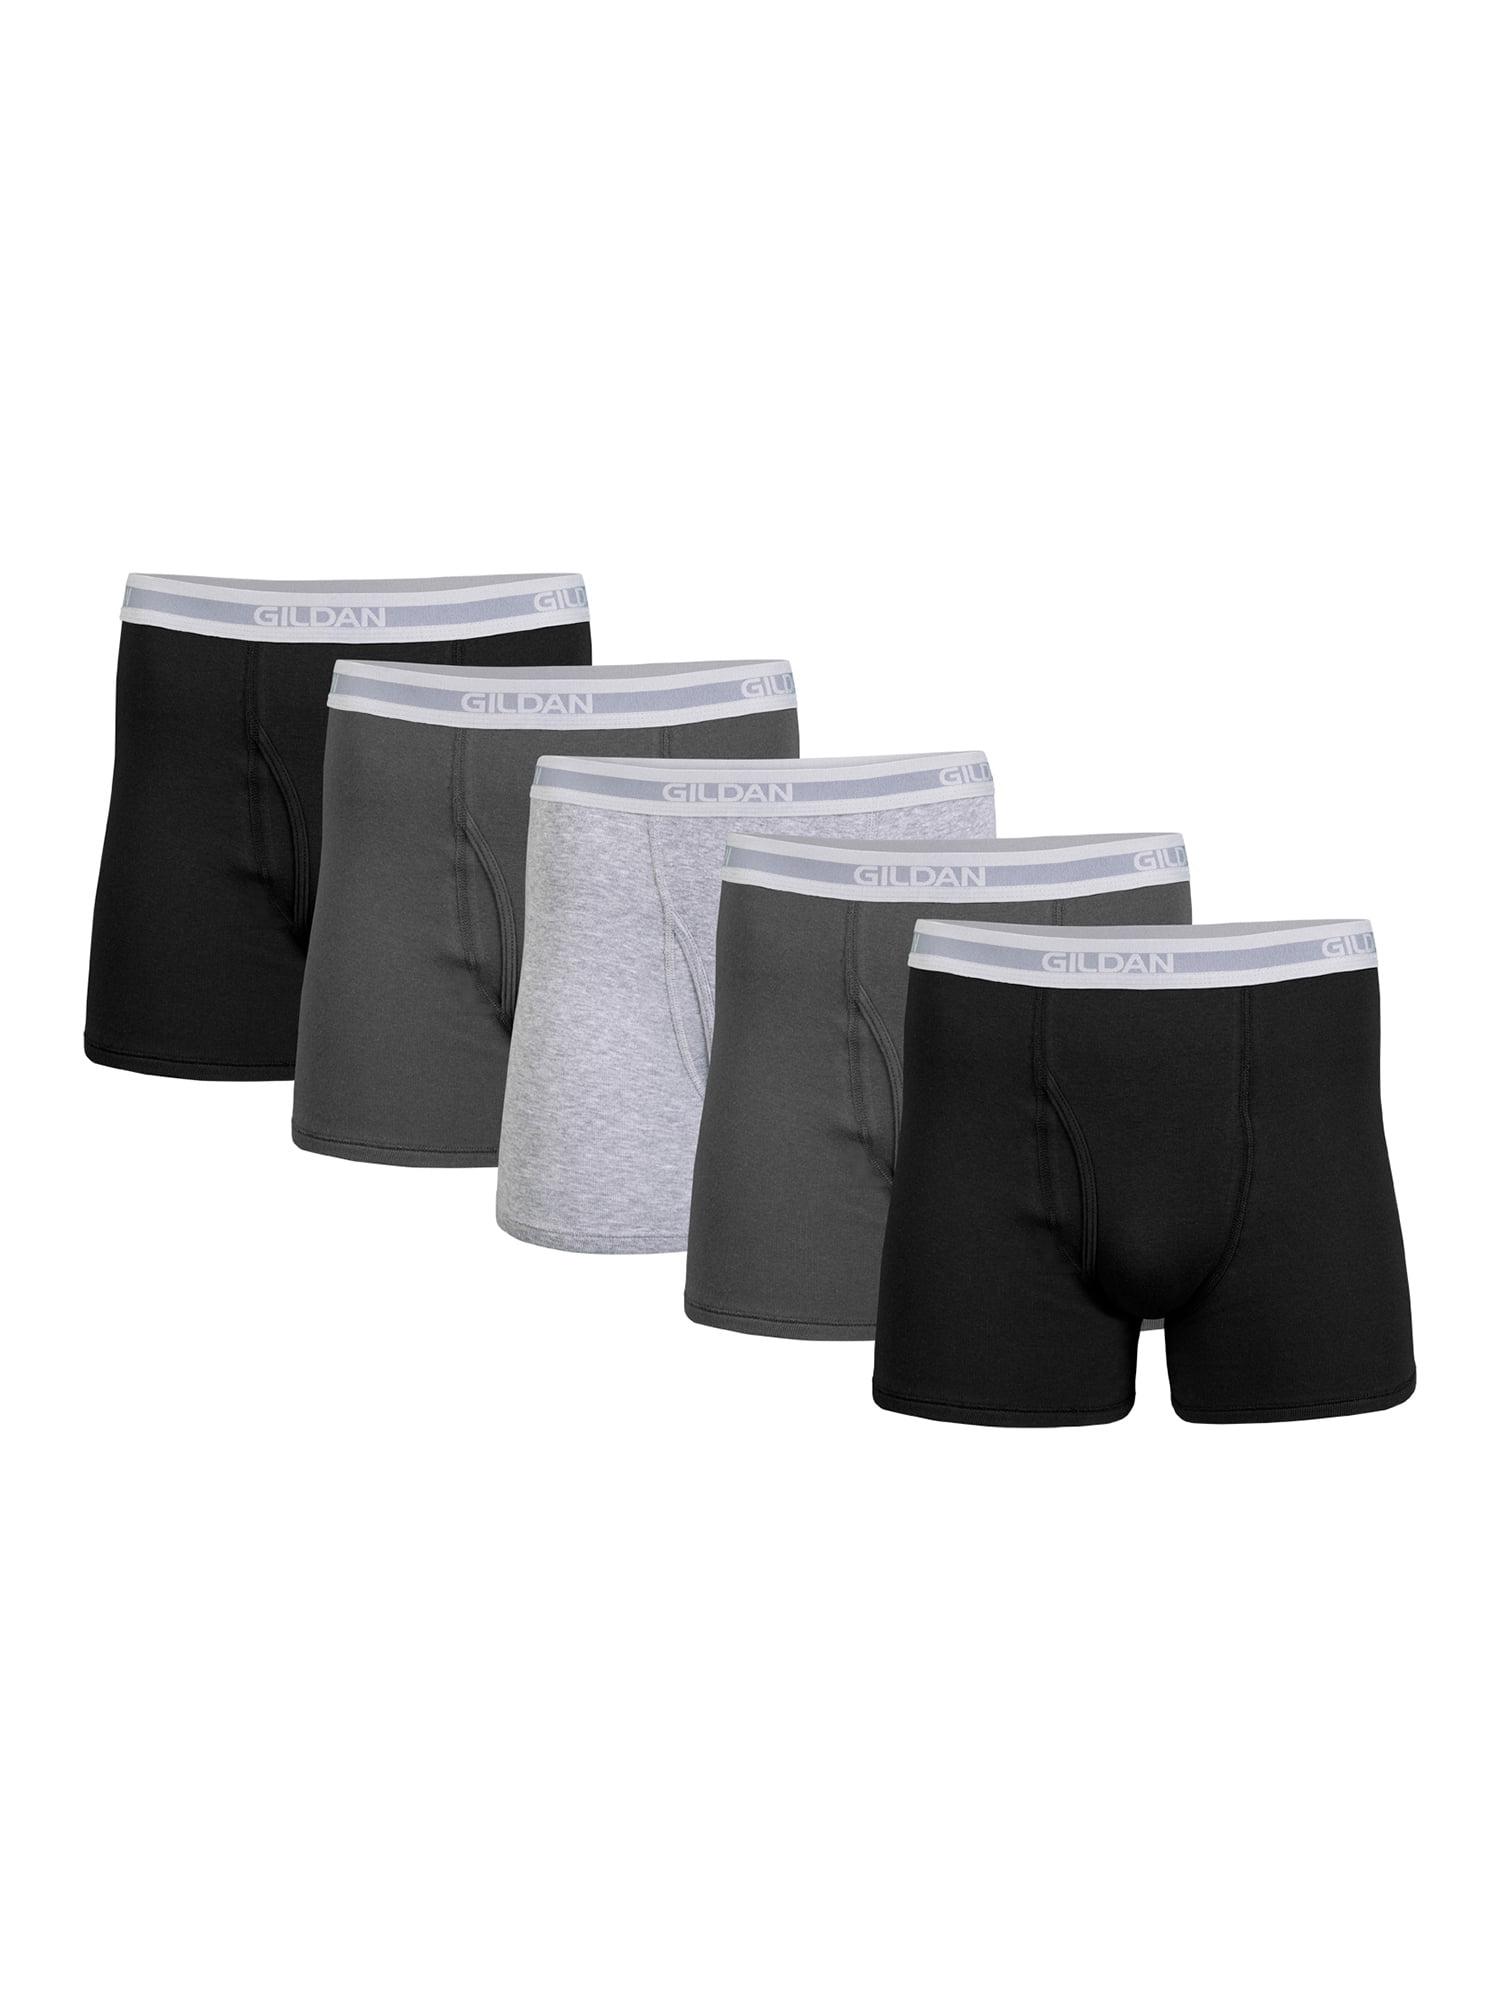 Mens Imperfect Wholesale Gildan Boxer Briefs, Assorted Sizes And